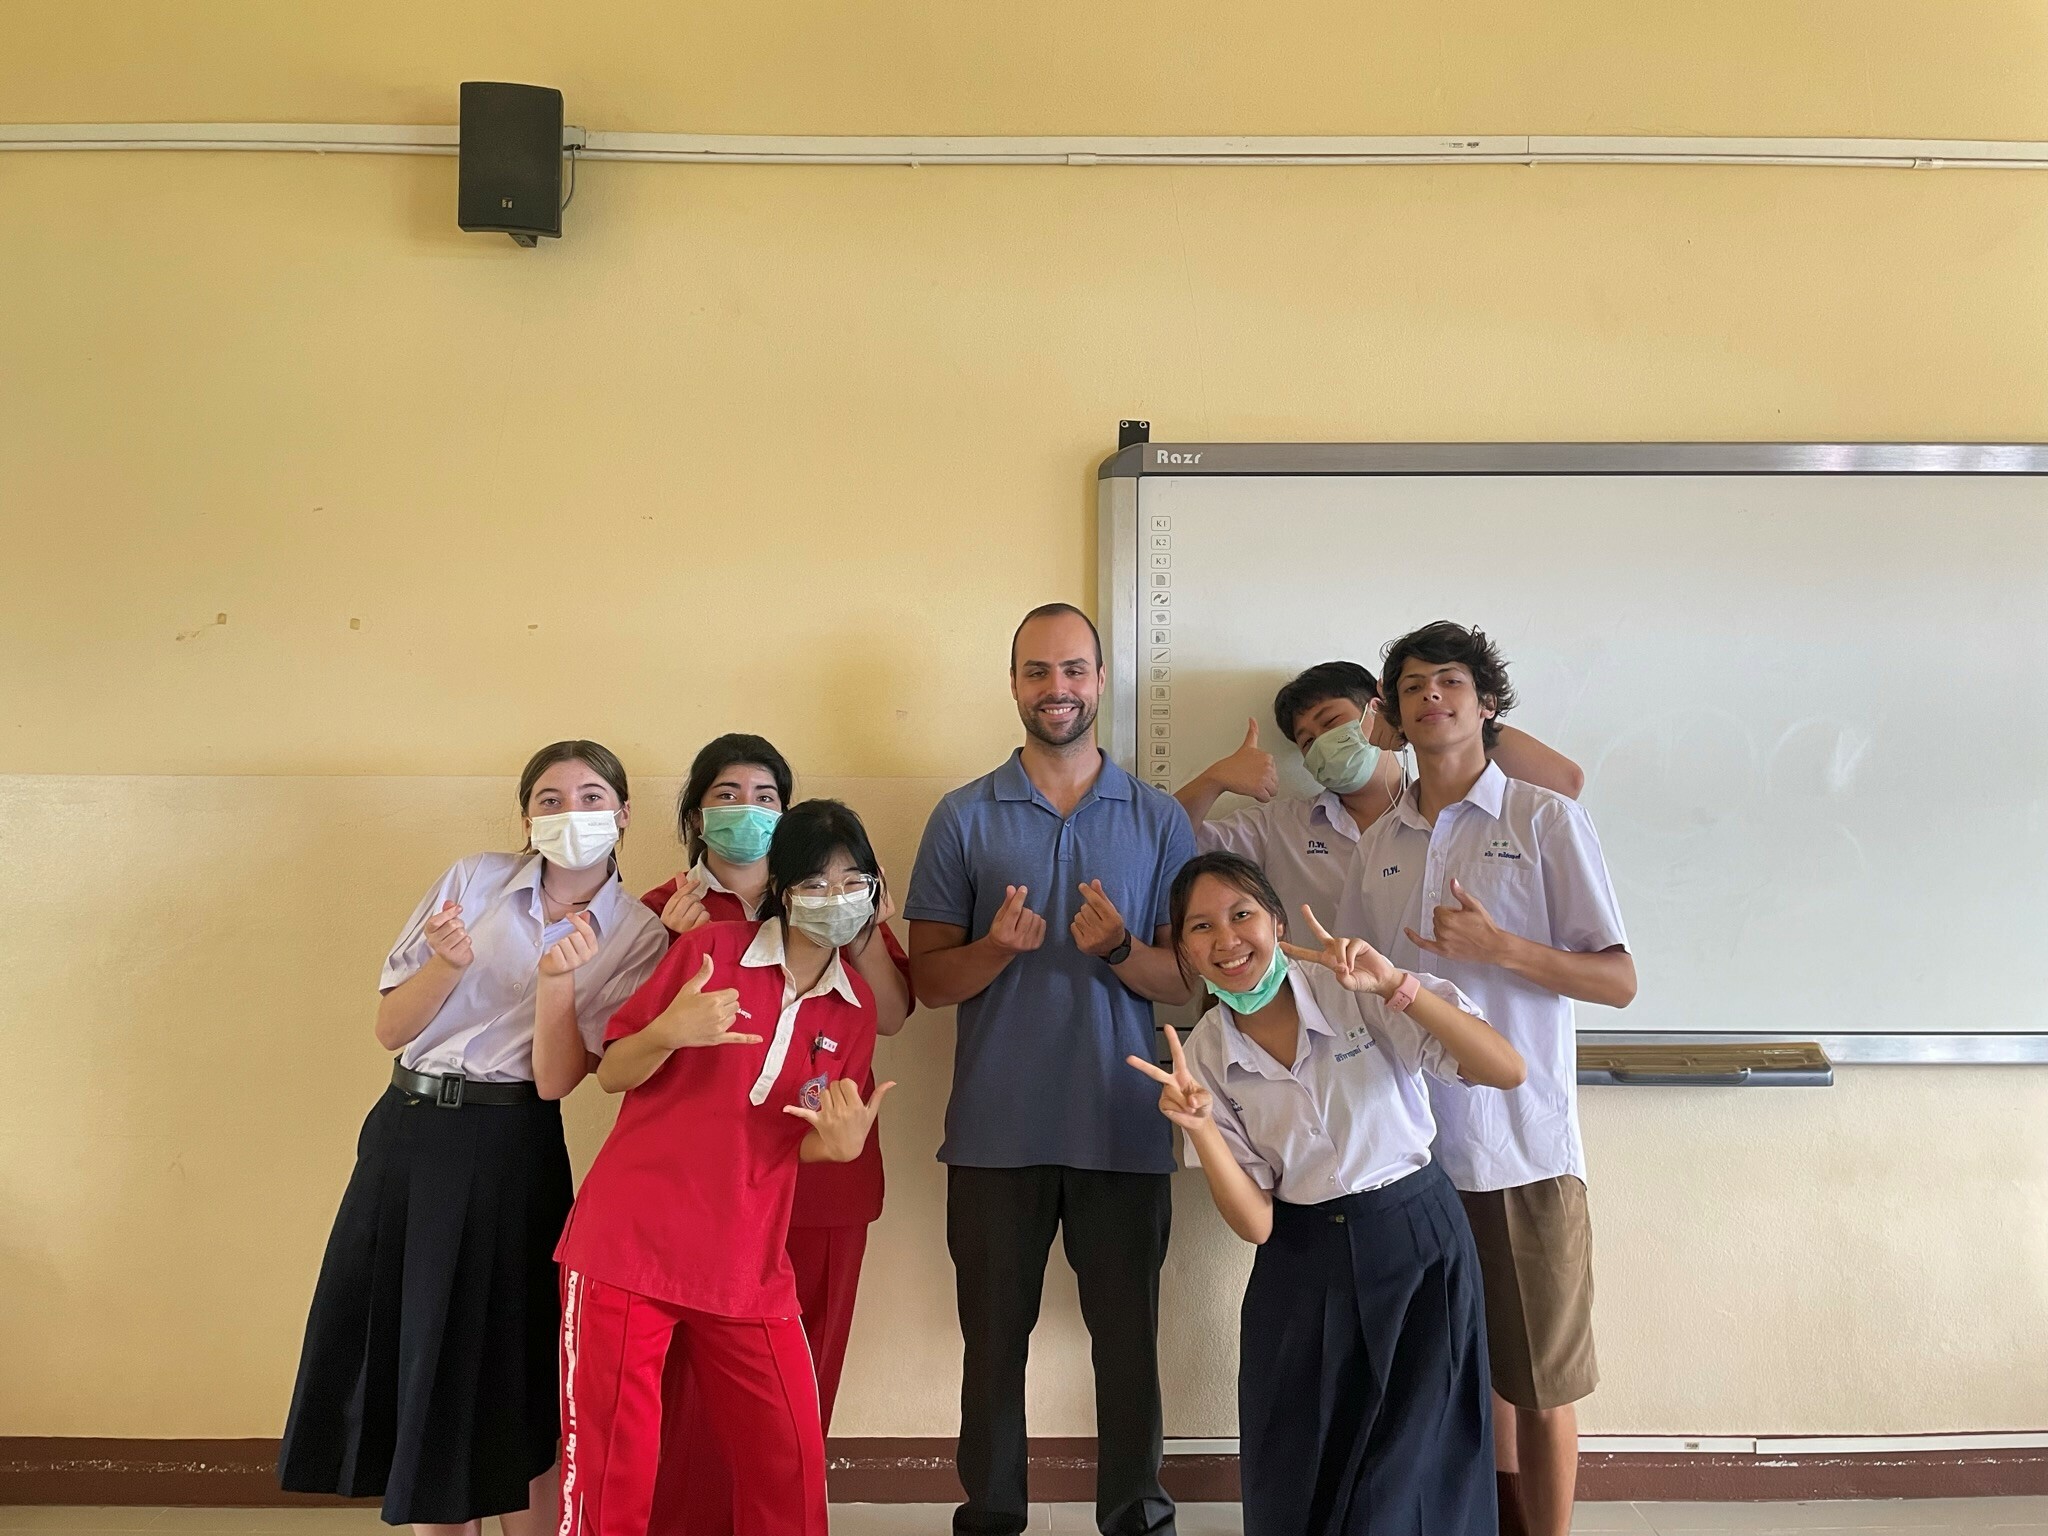 Carsyn poses with her classmates at her host school in Thailand